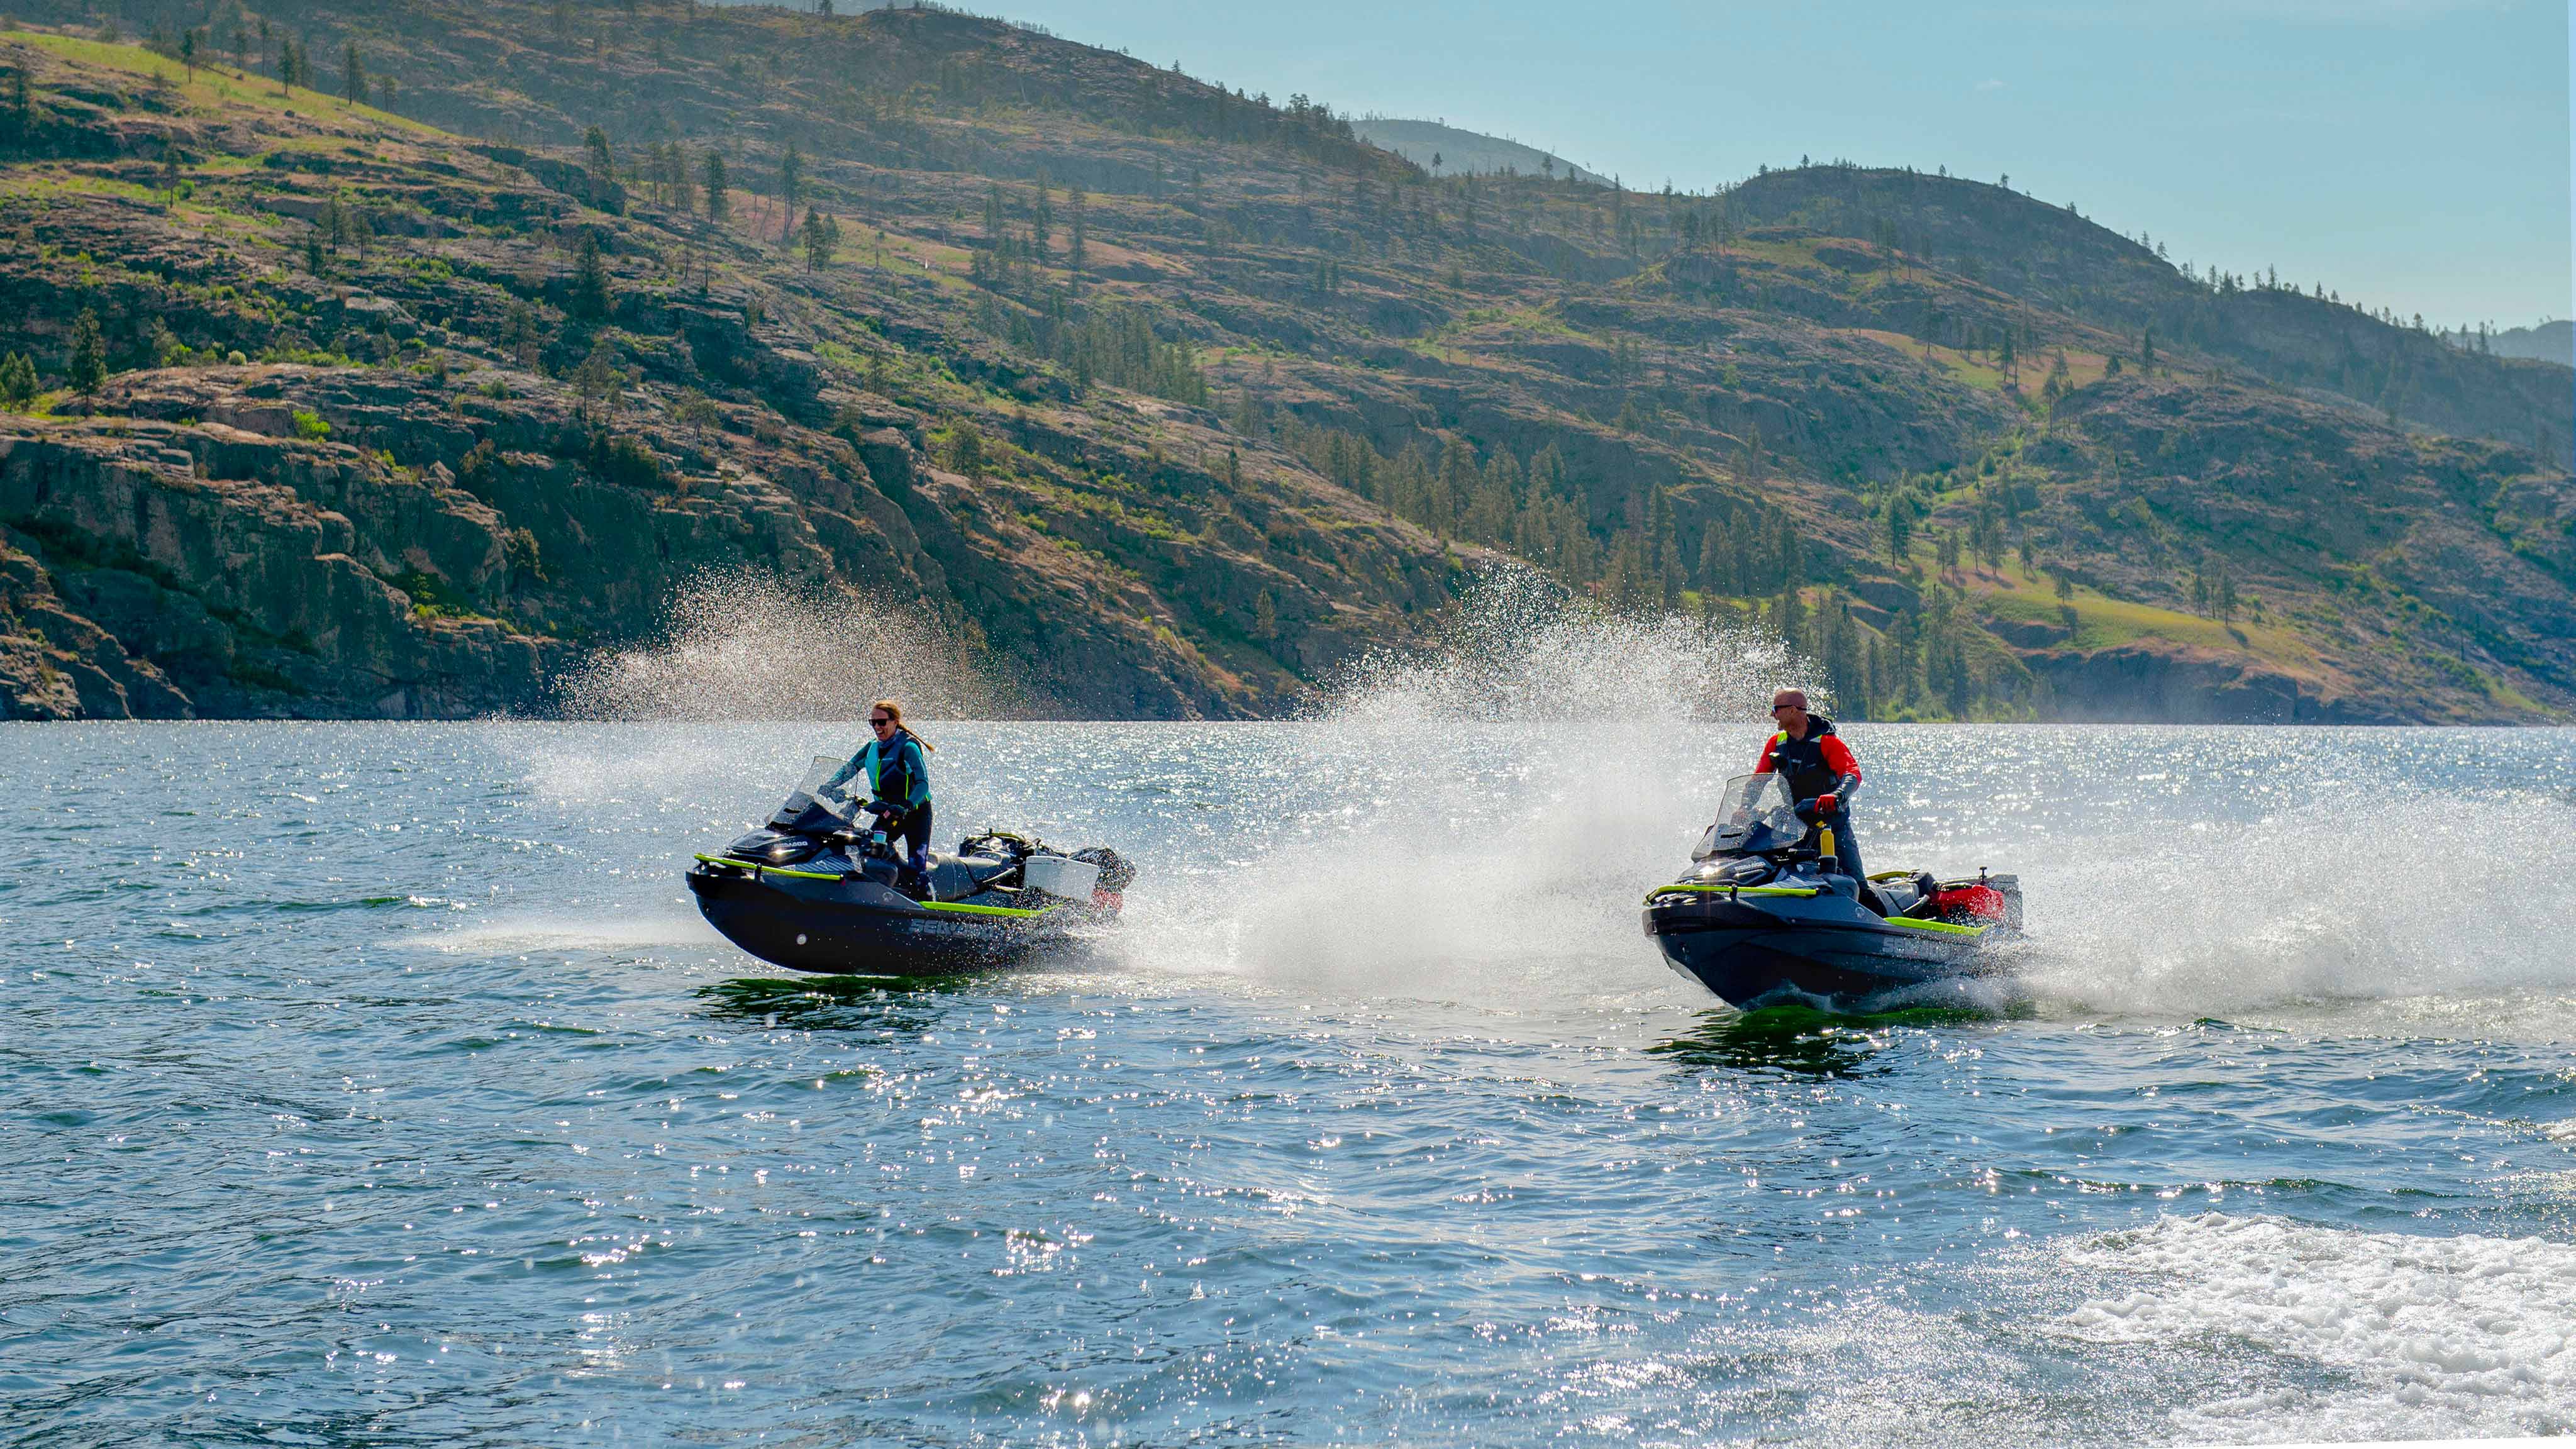 Two riders on their new Sea-Doo Explorer Pro 170